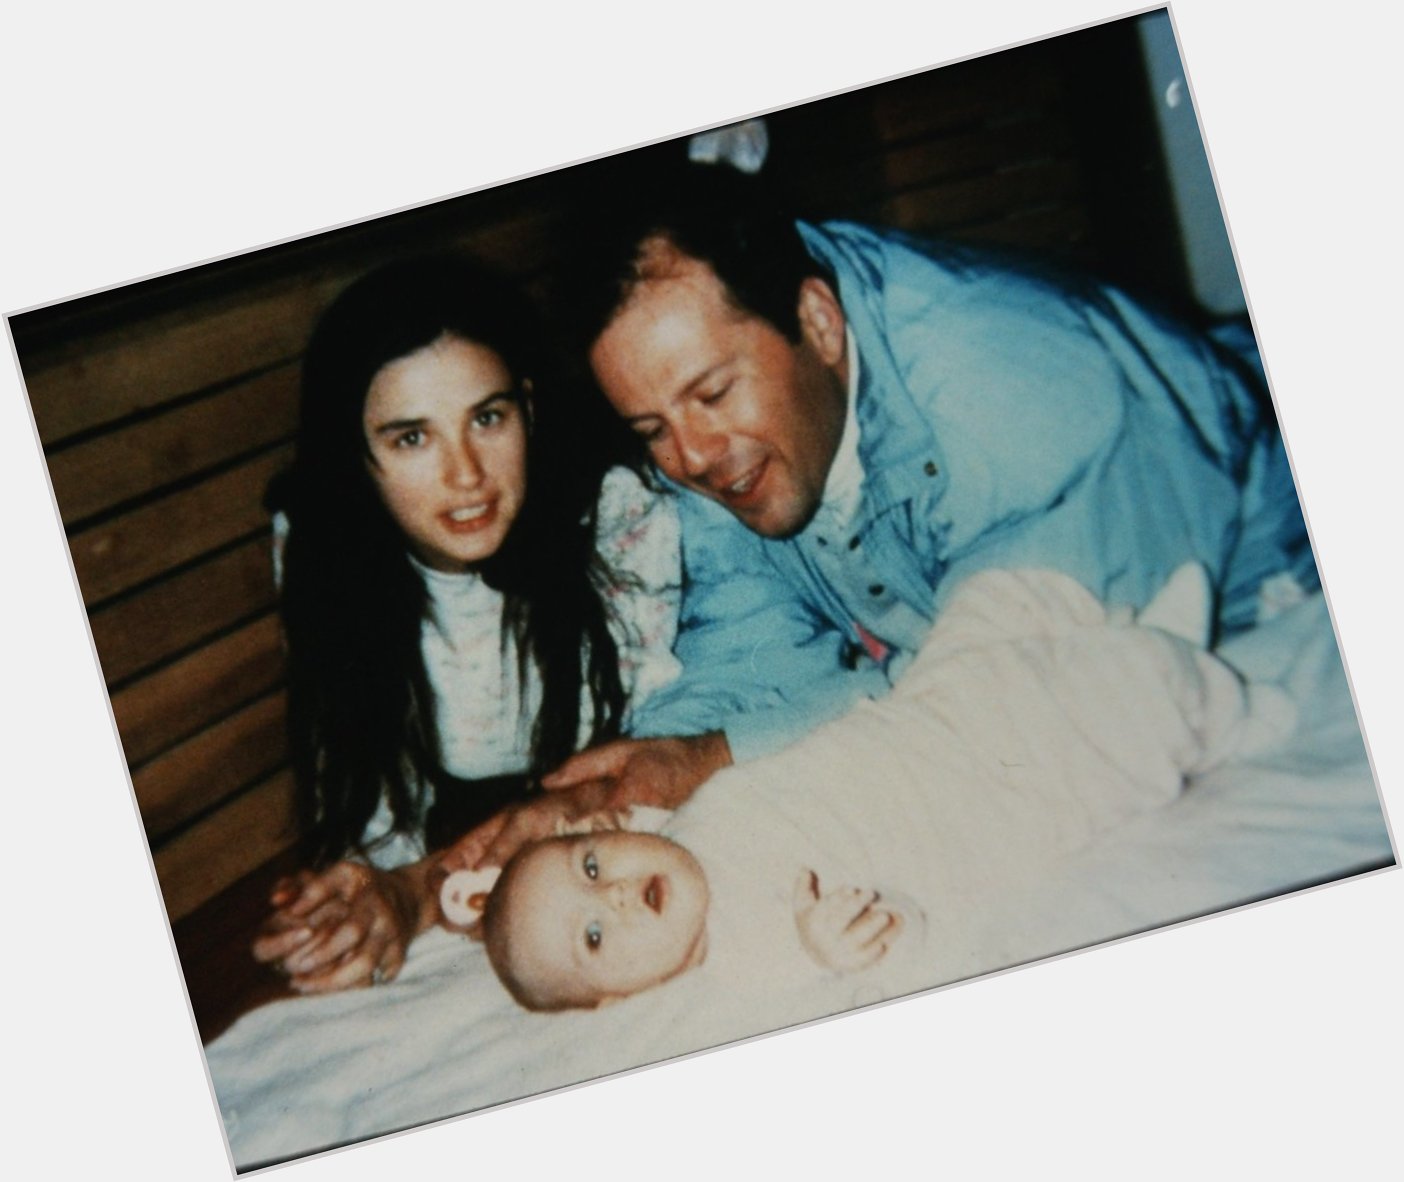 Aug 16, 1988, a daughter was born to Demi Moore & Bruce Willis. Happy 29th birthday to Rumer Willis! 